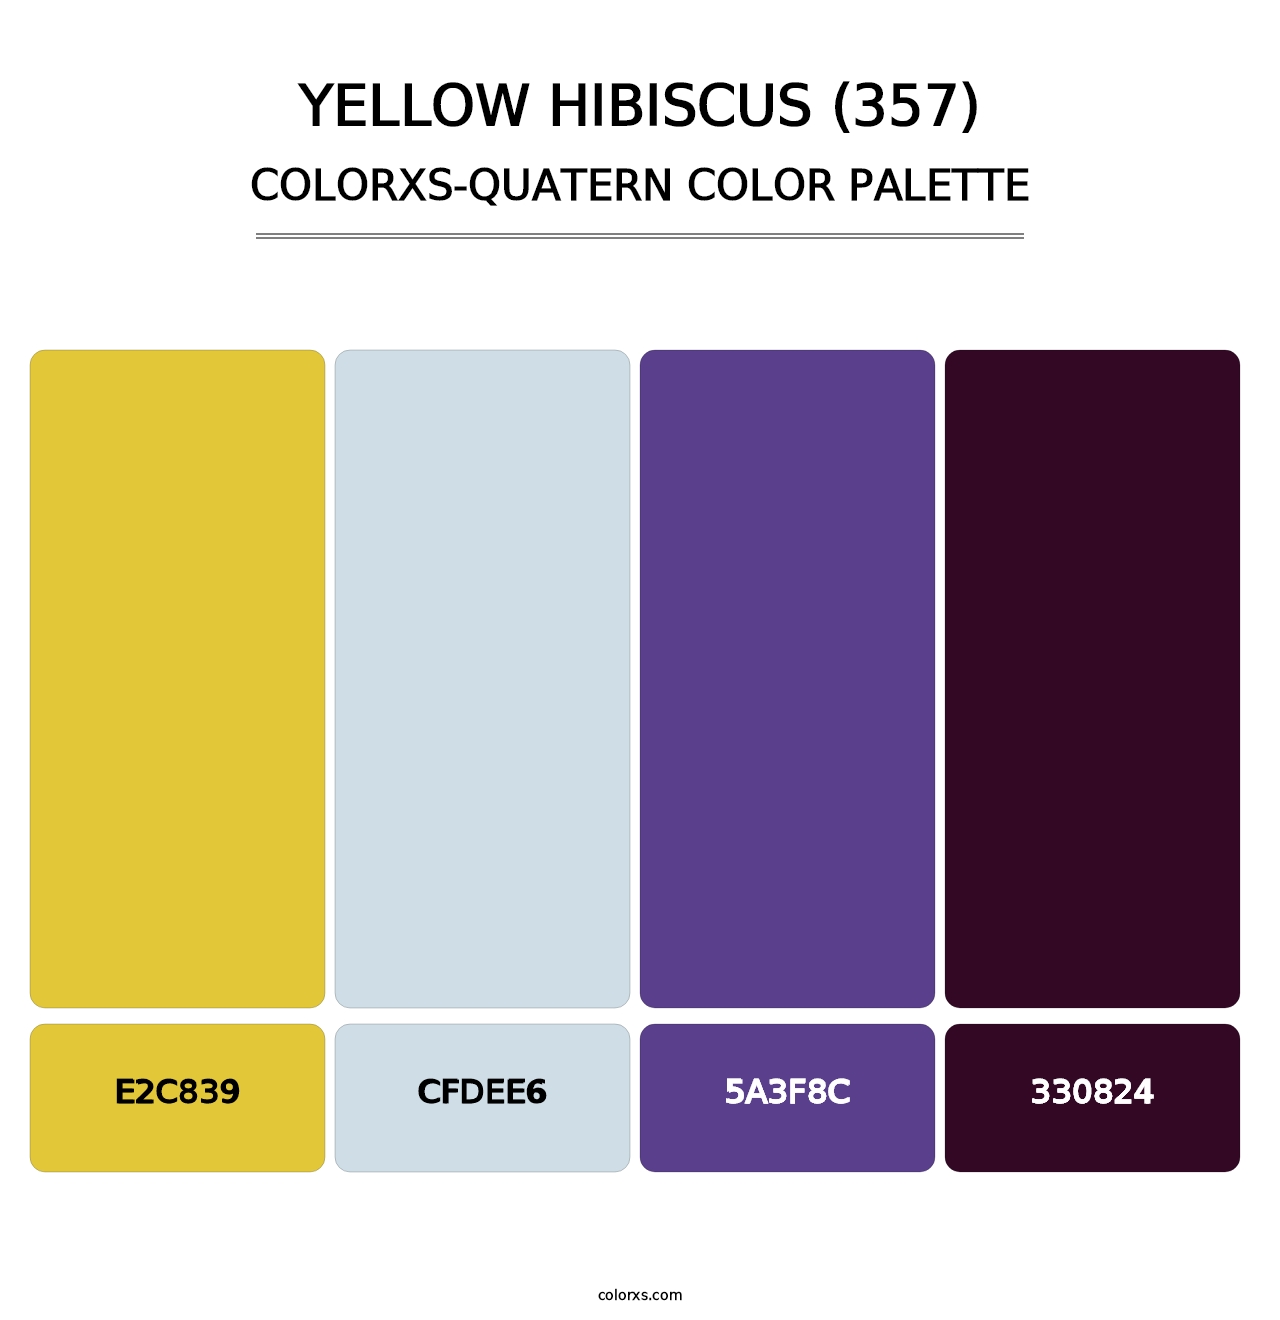 Yellow Hibiscus (357) - Colorxs Quatern Palette